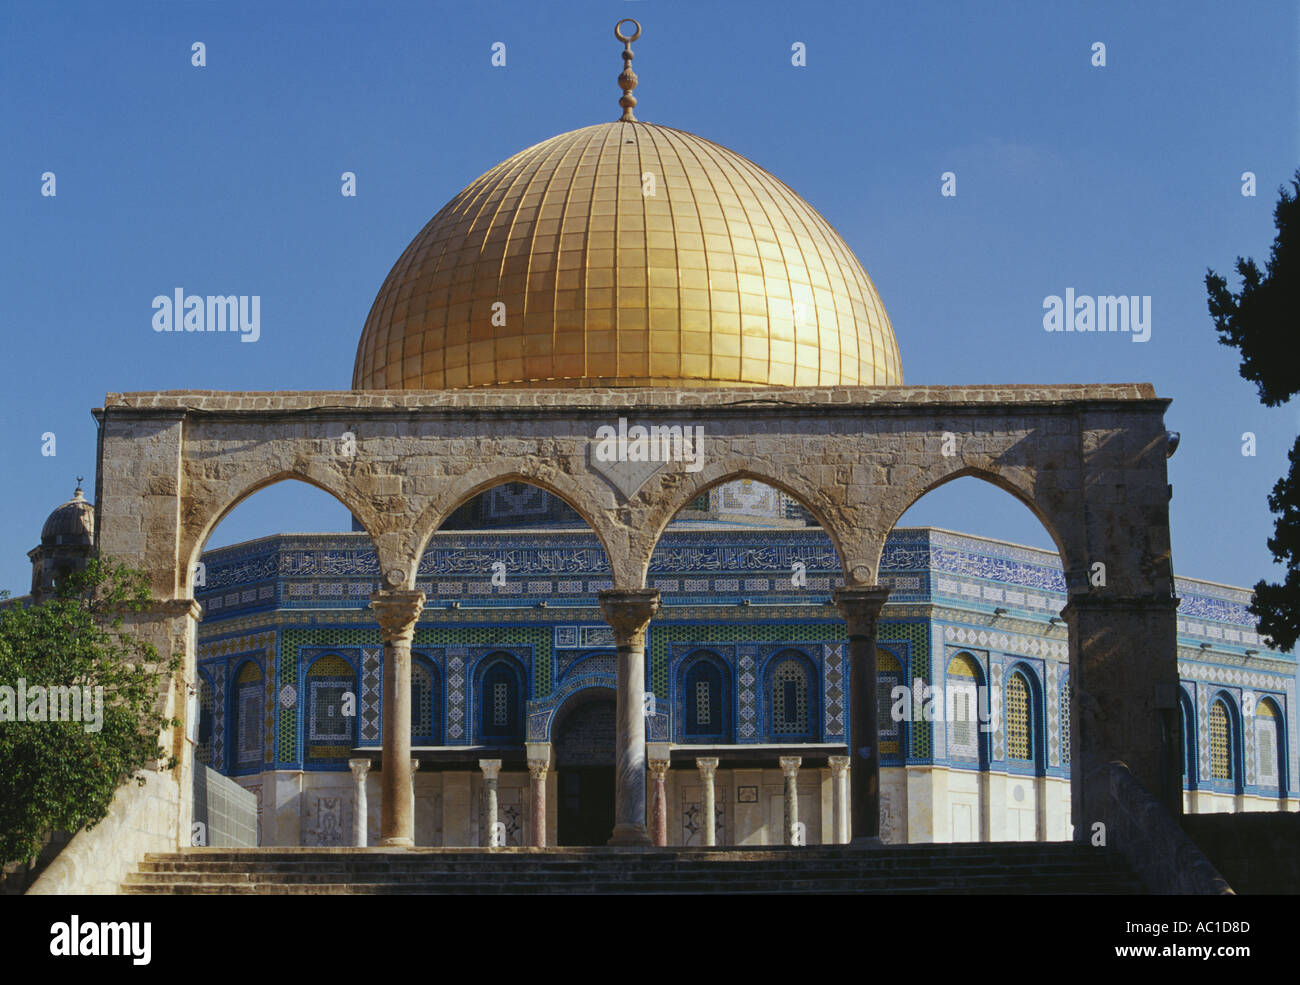 Dome of The Rock Mosque in Jerusalem, Israel Stock Photo